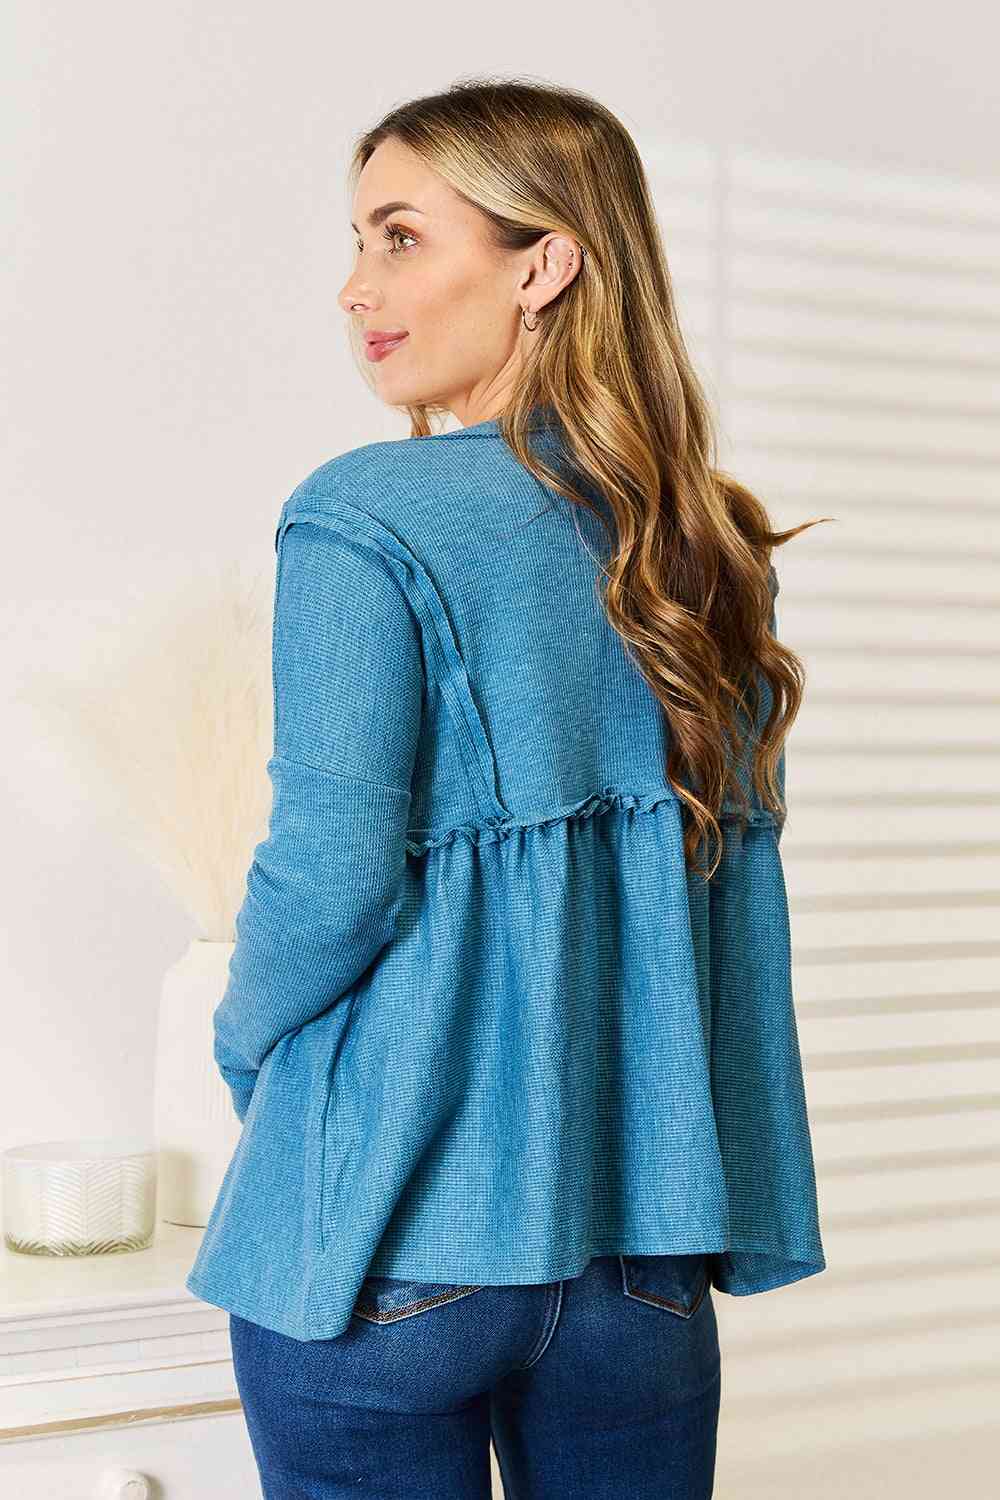 Jade By Jane Full Size Frill Trim Babydoll Blouse - nailedmoms